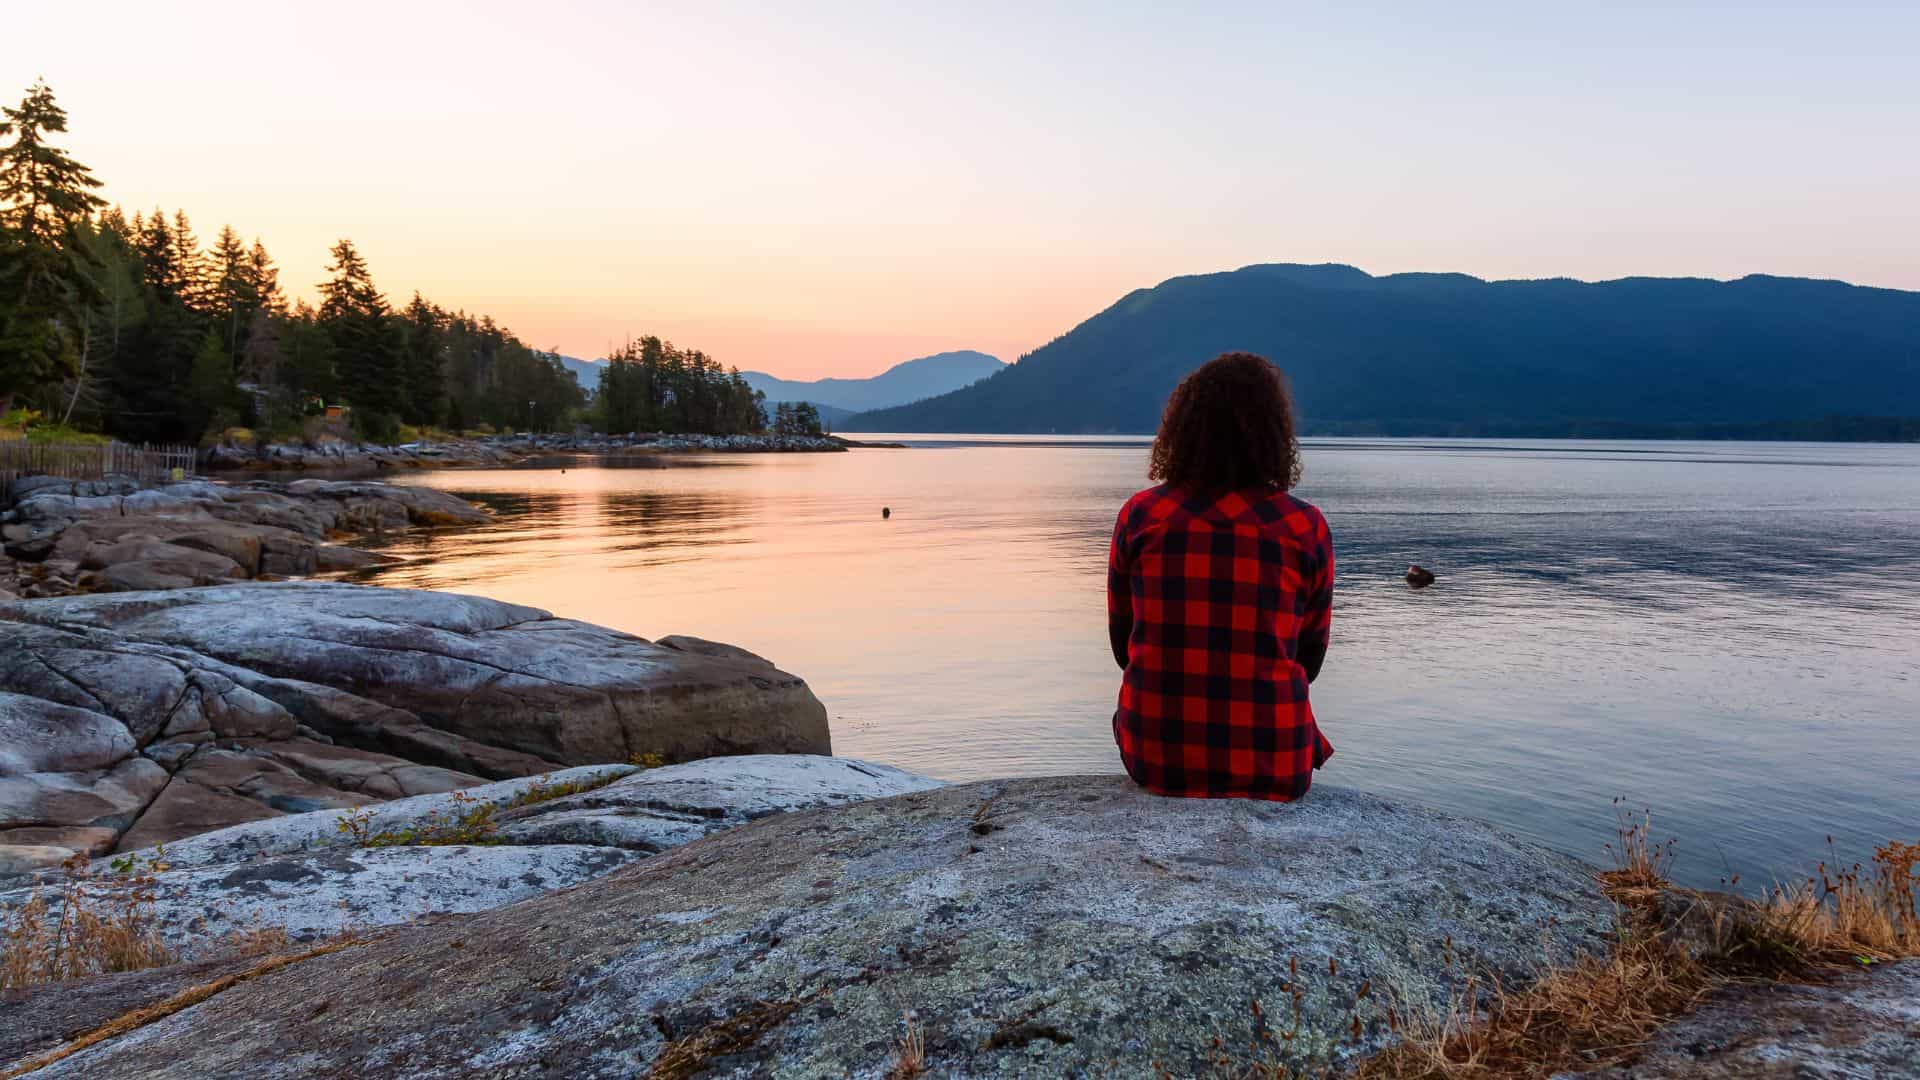 photo of a woman in plaid sitting peacefully by the water at sunset. Her spiritual disciplines have led her here and have positively impacted her mental health.